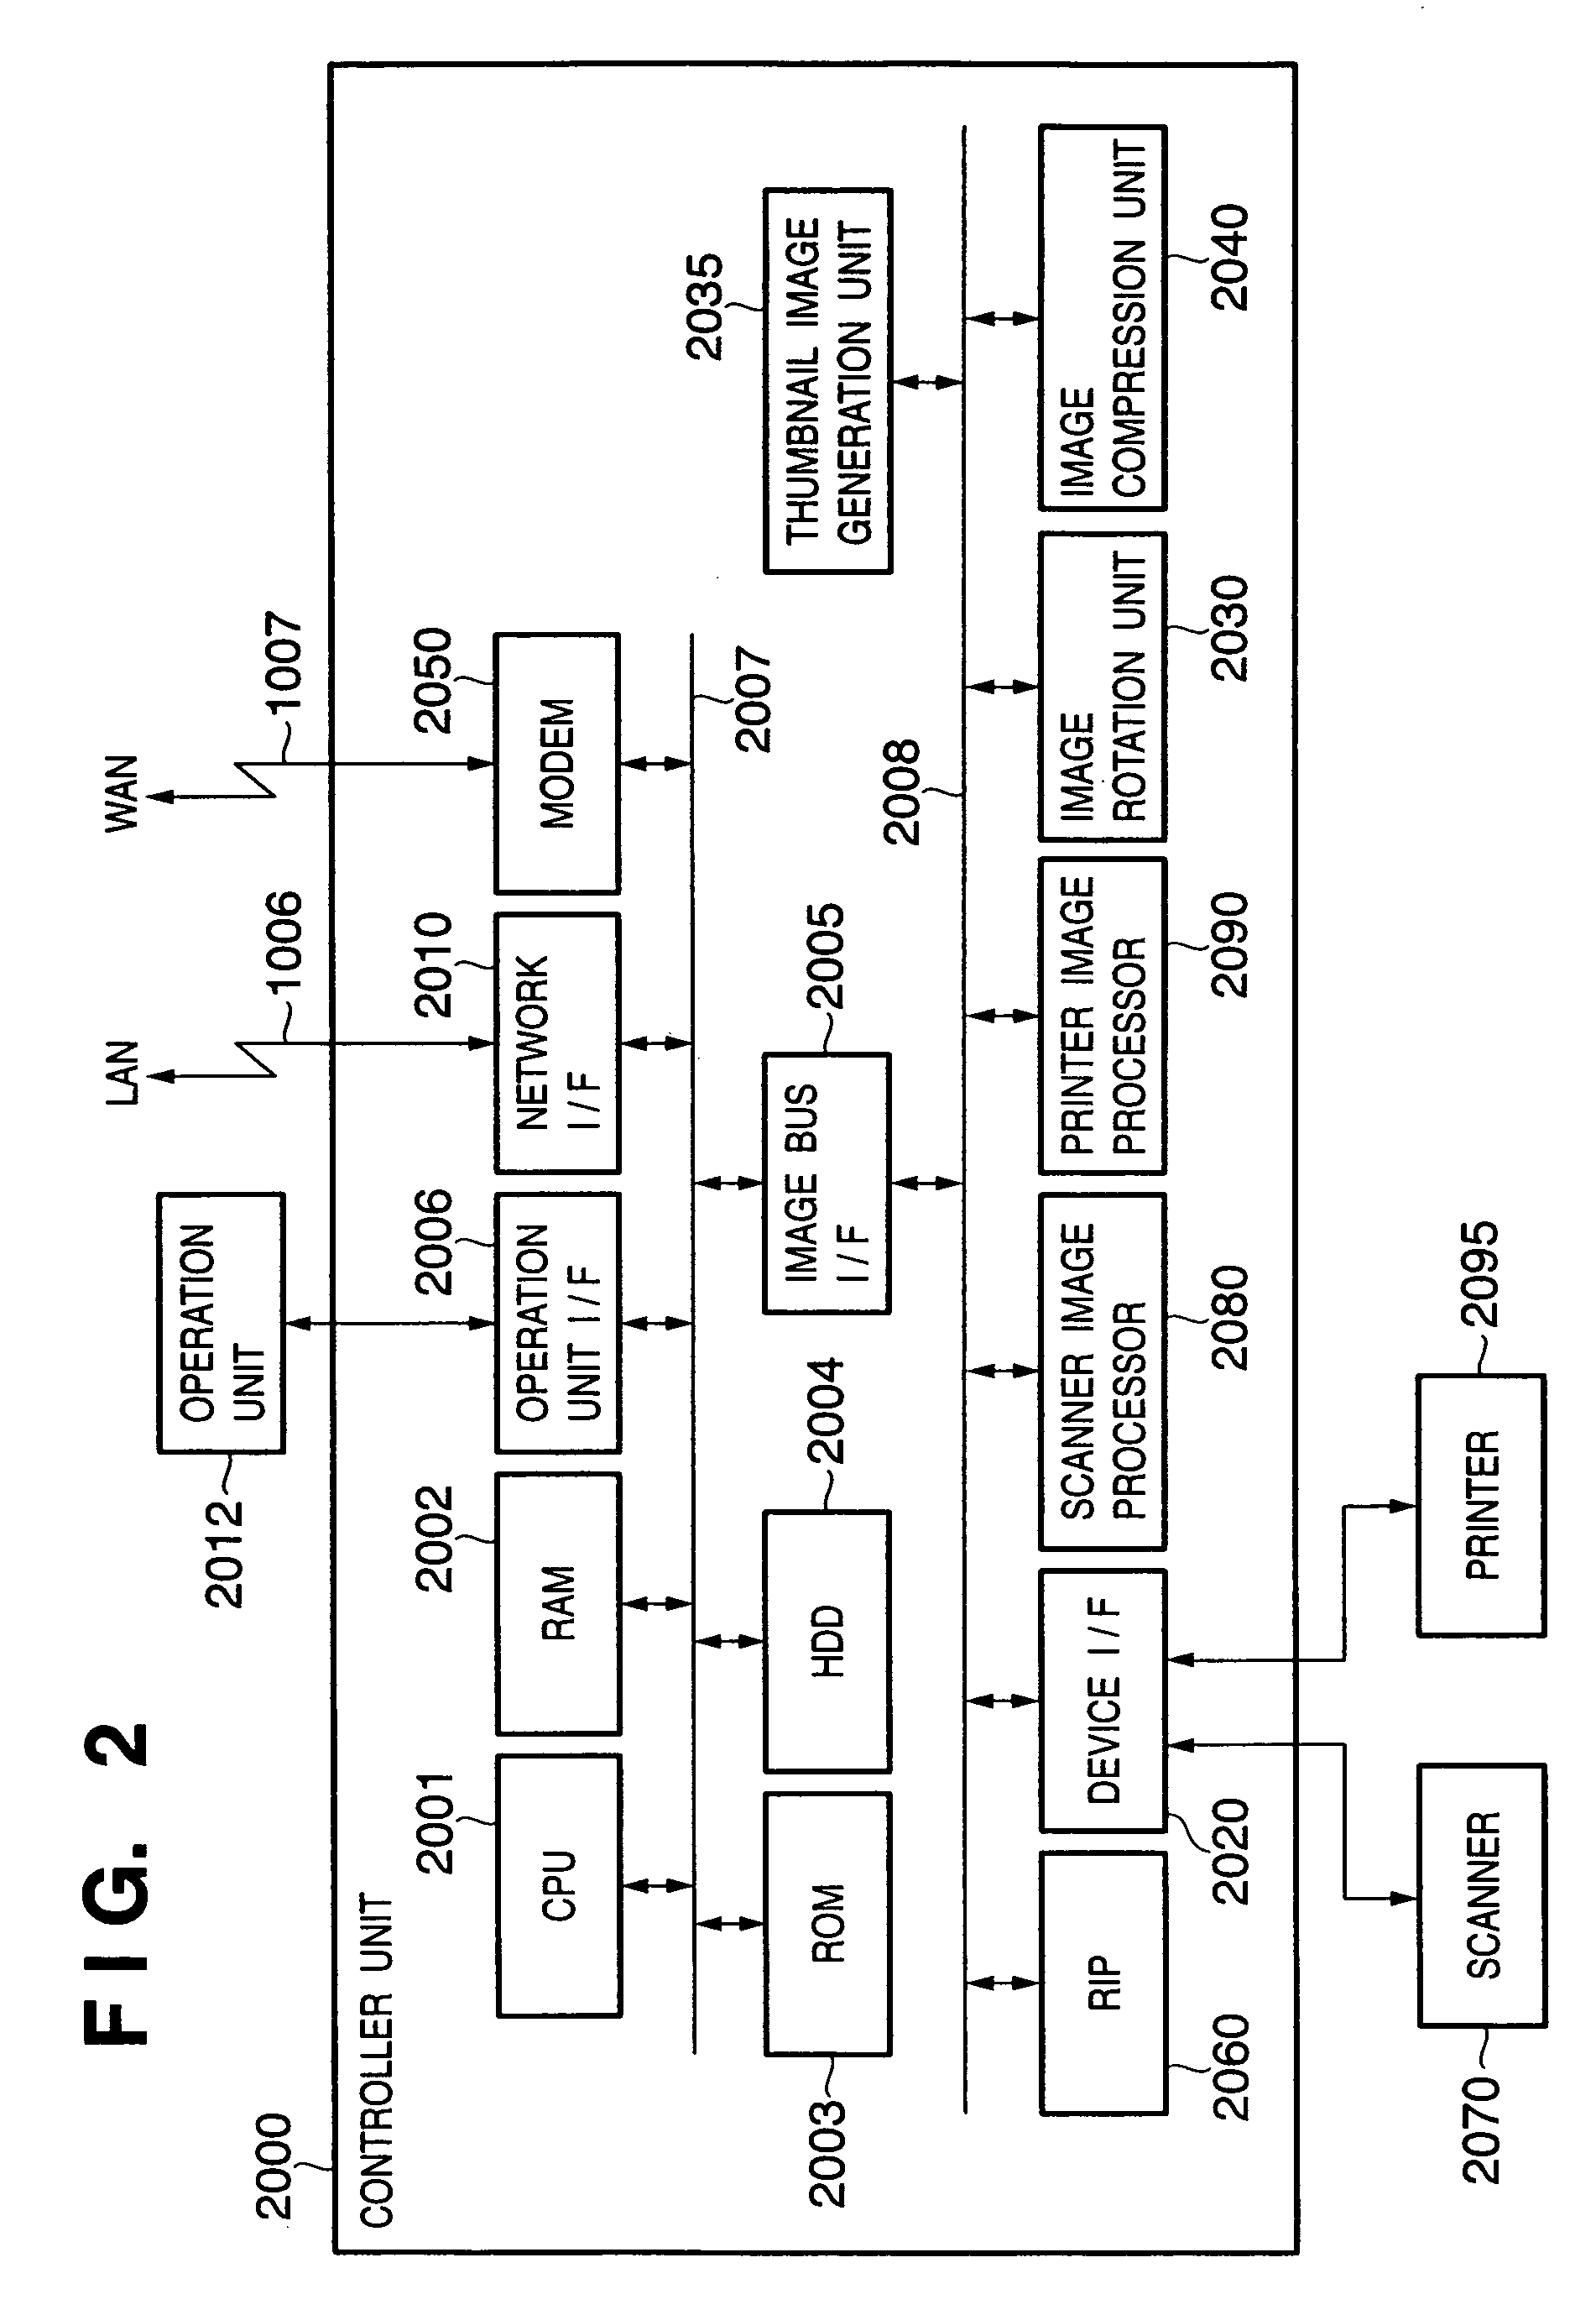 Method and apparatus for automated download and printing of Web pages